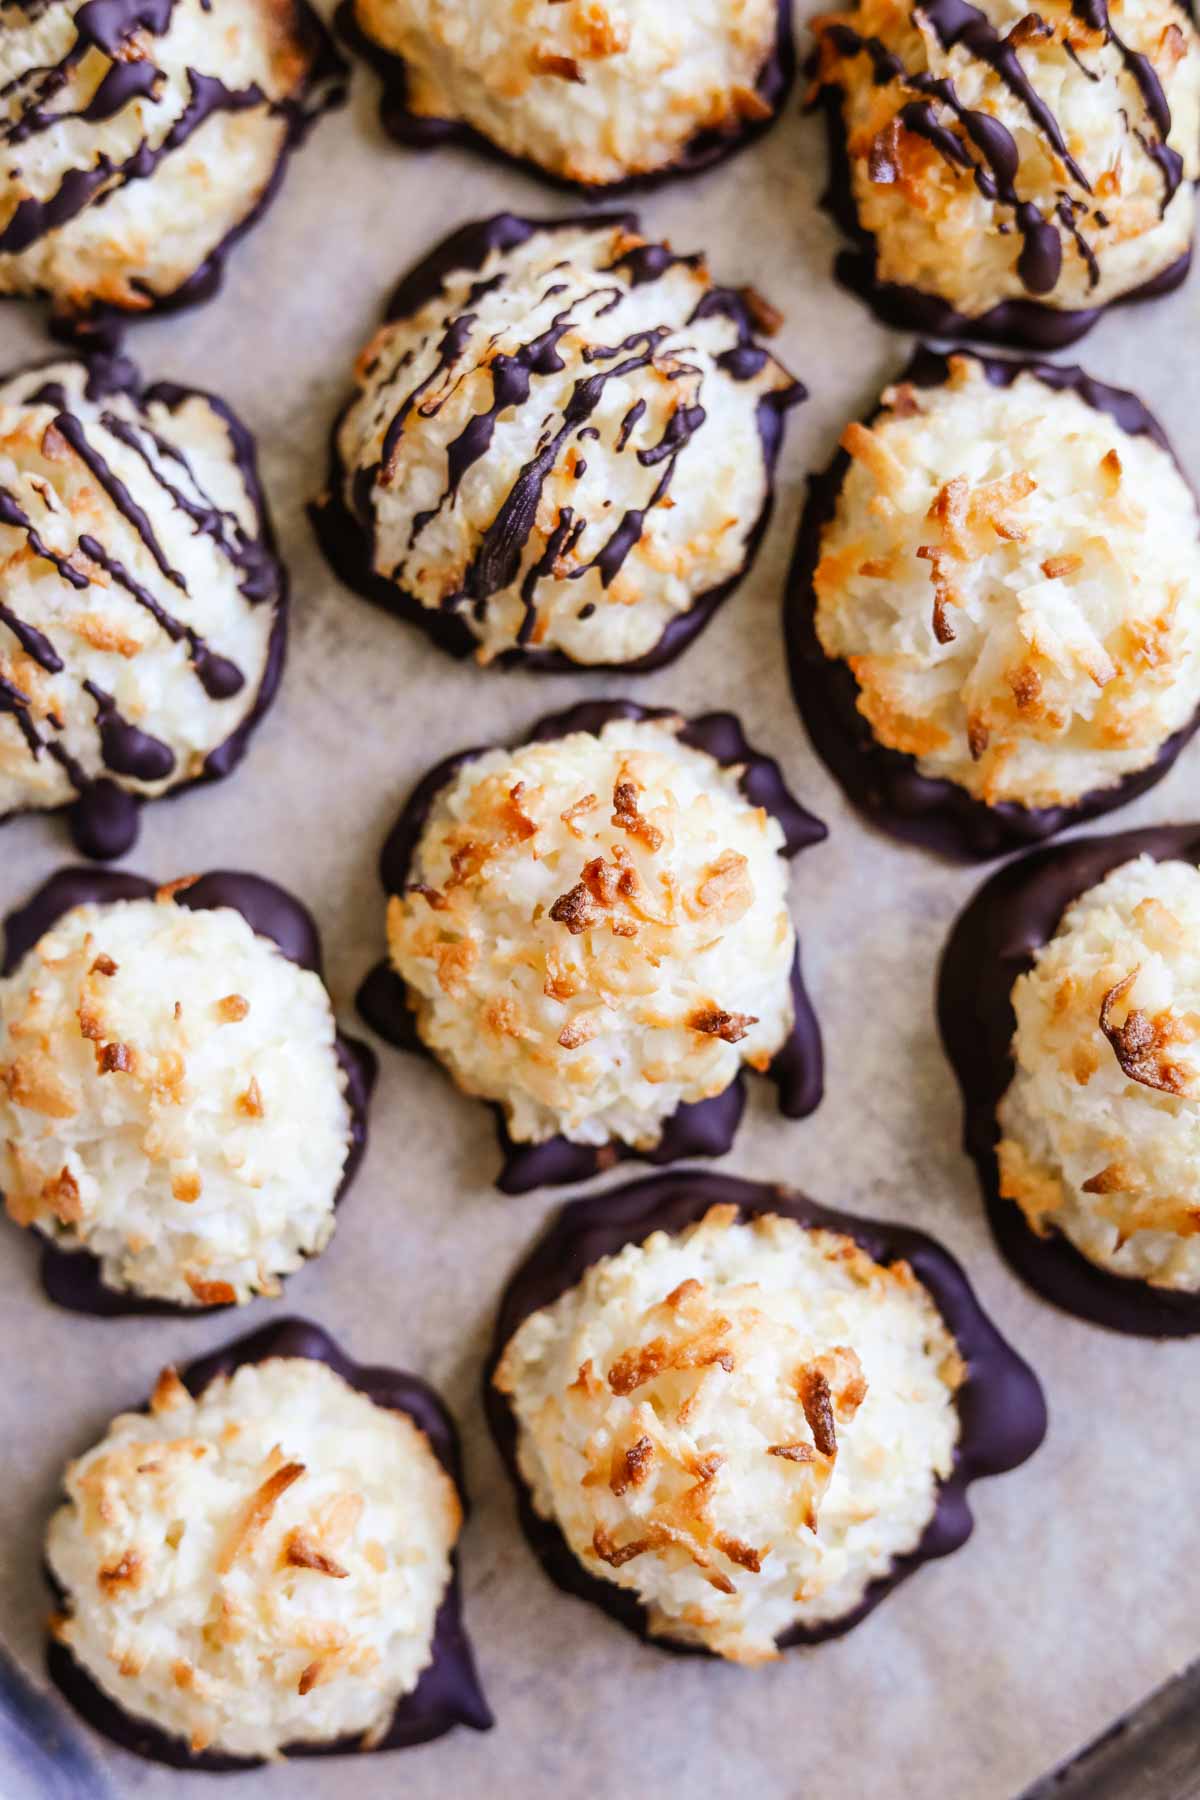 Gluten-free coconut macaroons without flour dipped and drizzled in semi-sweet chocolate.